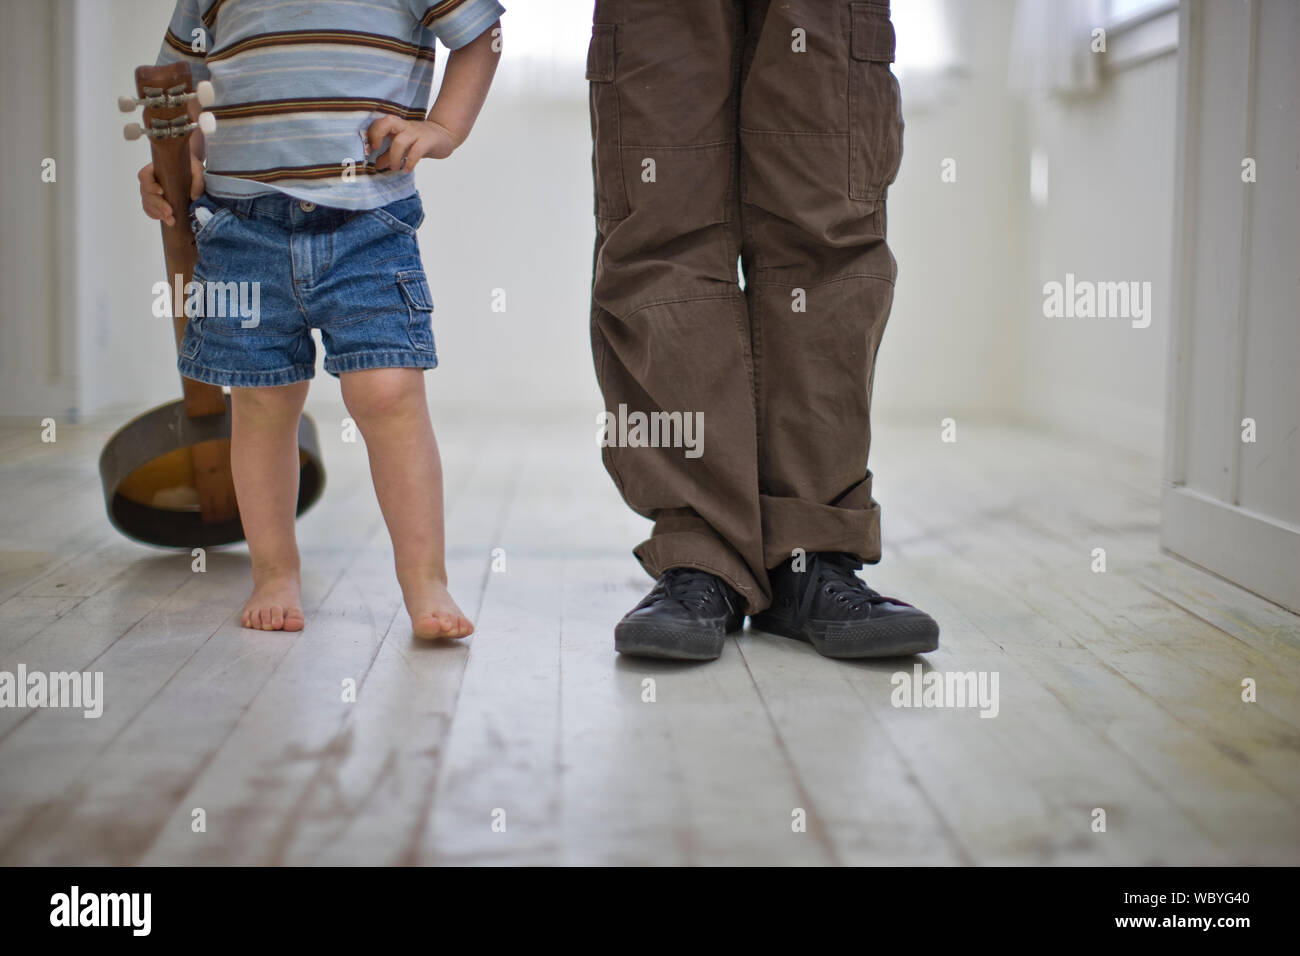 Little boy holding banjo and his older brother standing in corridor Stock Photo